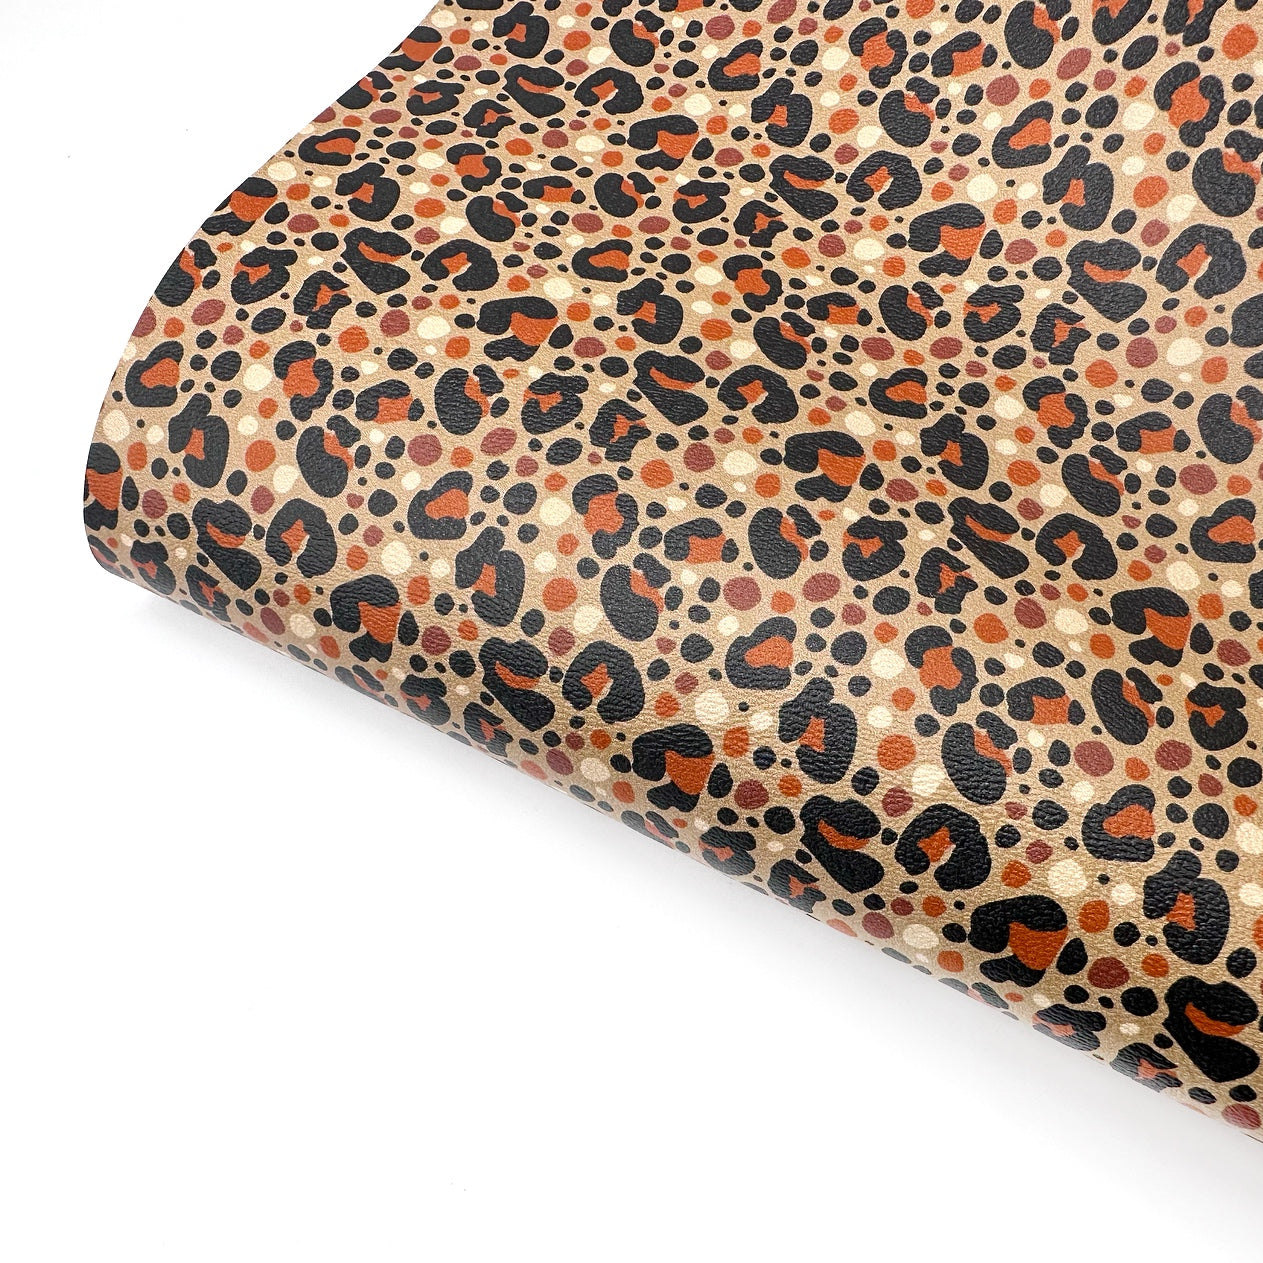 Bold Zoo Leopard Premium Faux Leather Fabric Sheets